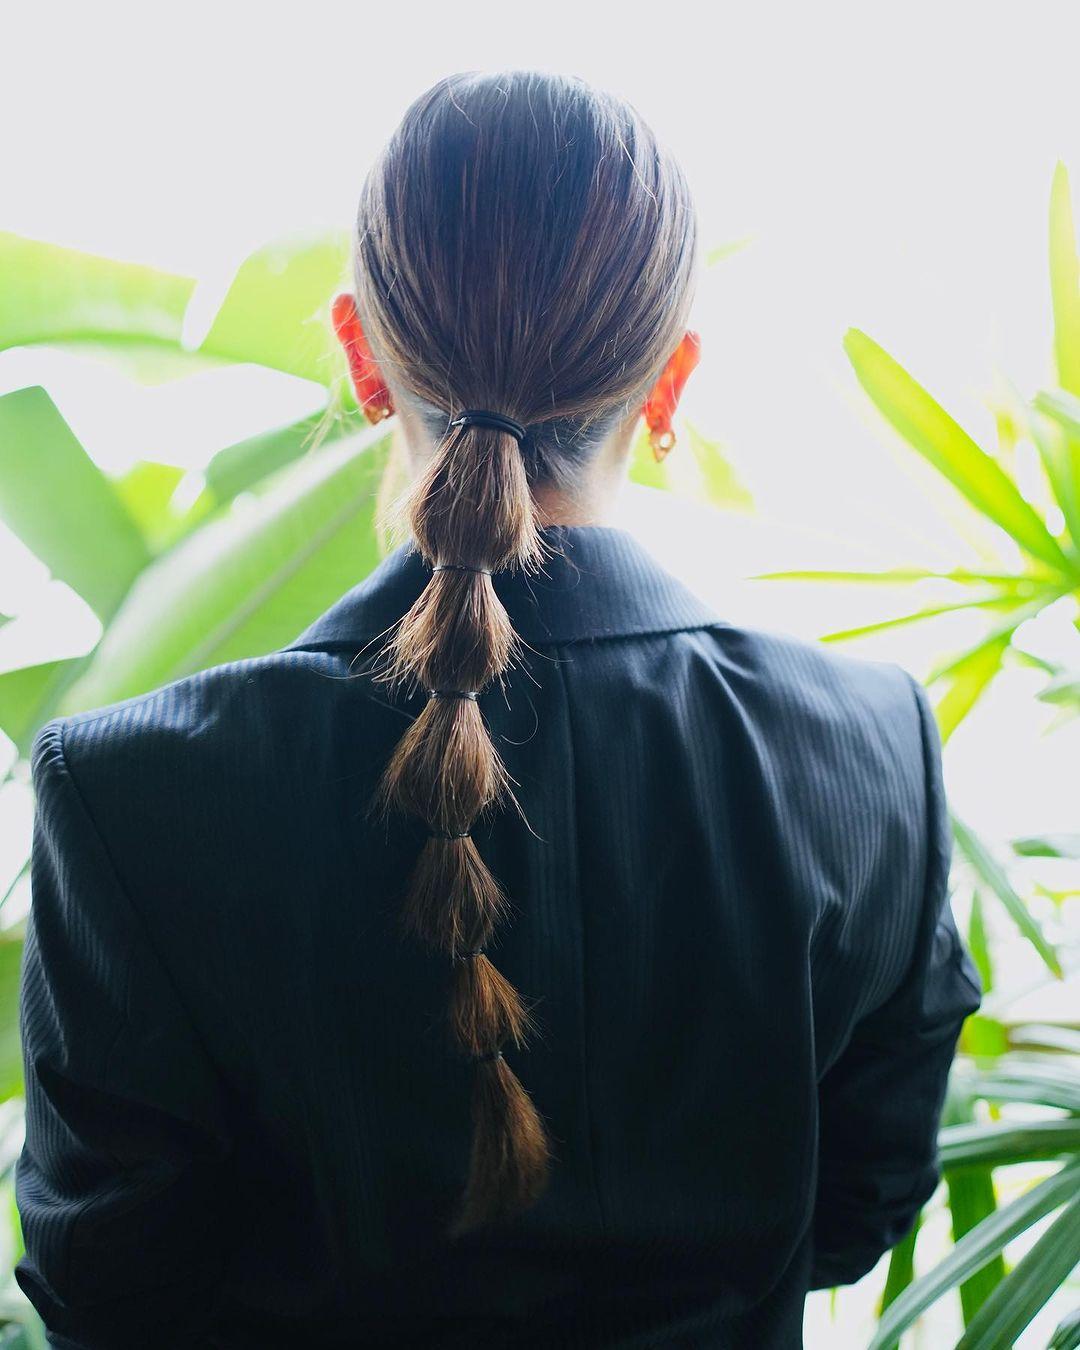 Alia's stunning hairstyle created by hairstylist Mike Desir consists of a sleek segmented ponytail, paired with trendy face-framing tendrils, which is an attention-grabber. Take a cue from Bhatt's style and make this versatile hairstyle a must-do